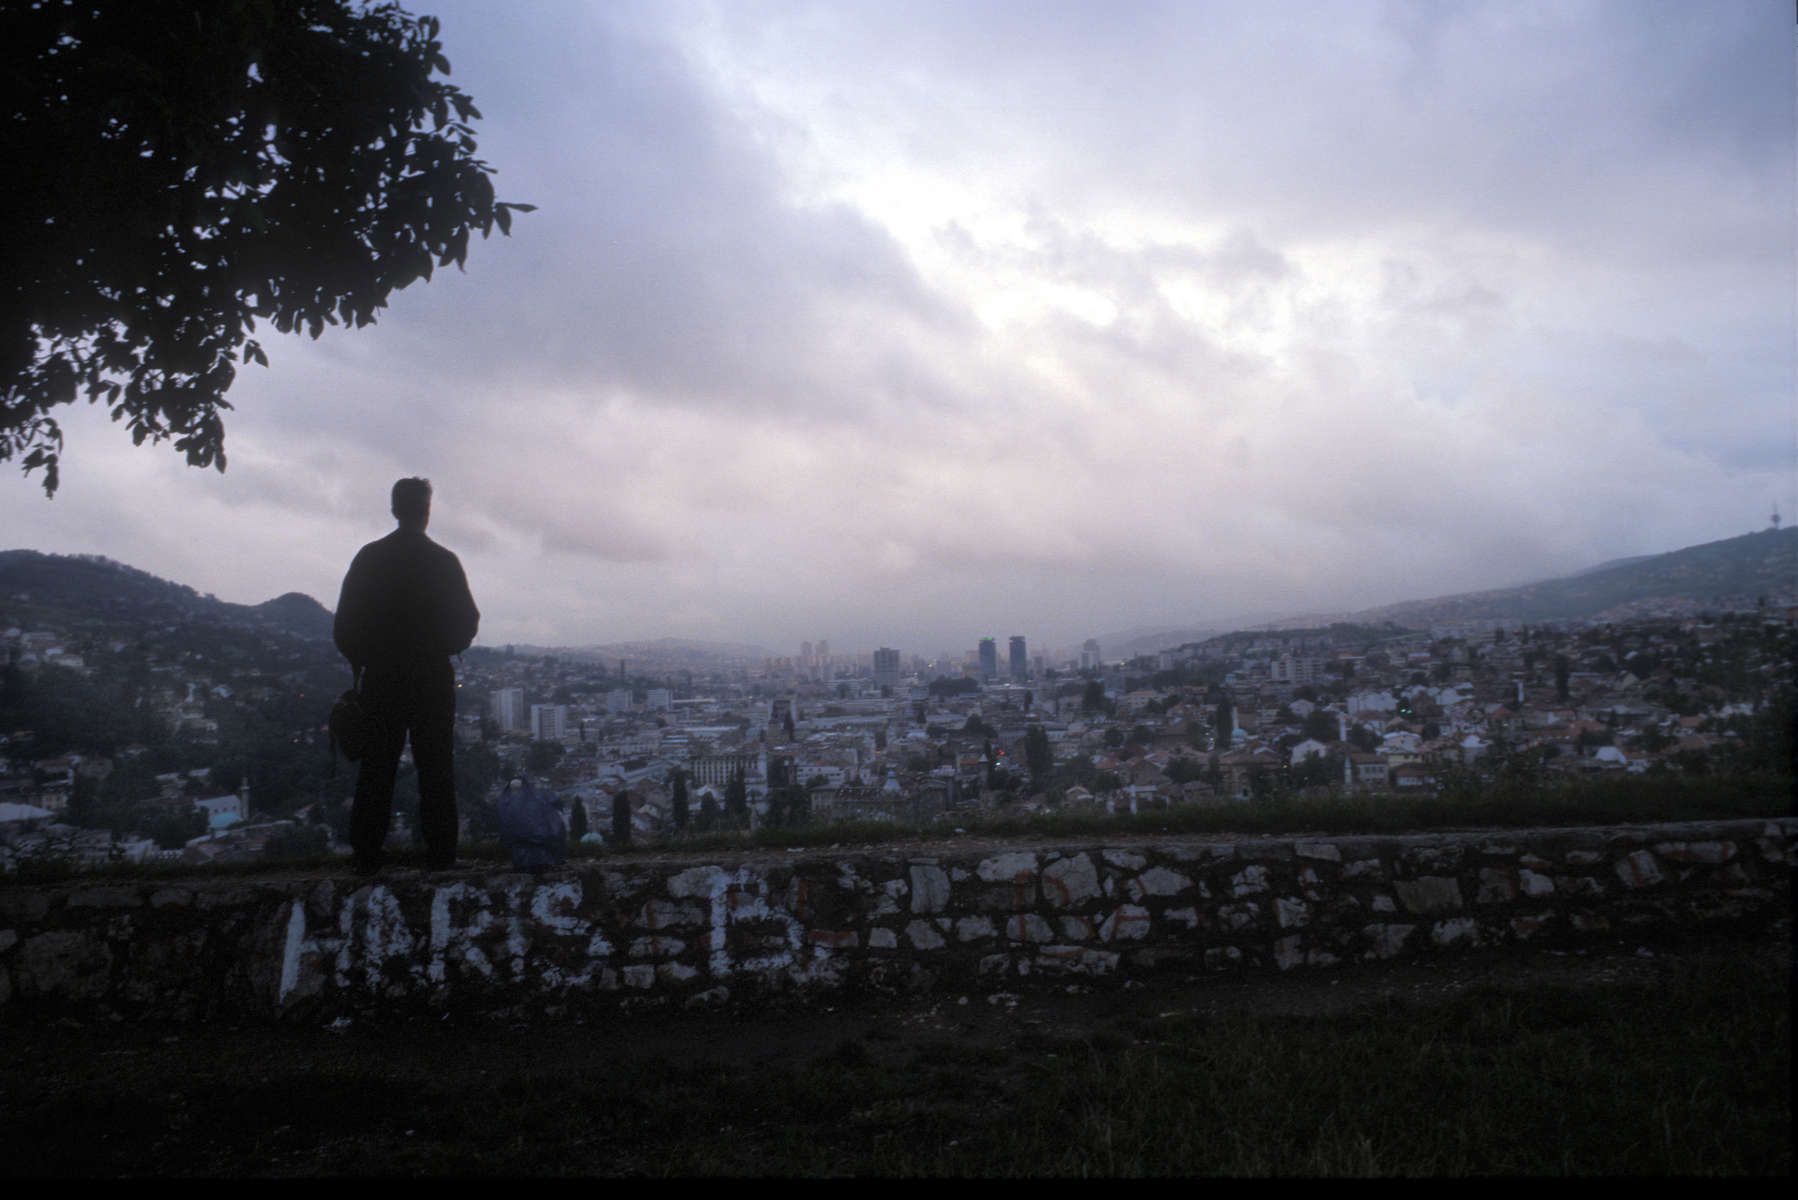 From one of the hillsides that climb up from Sarajevo, a man looks out over the city at sunset. July 2004.